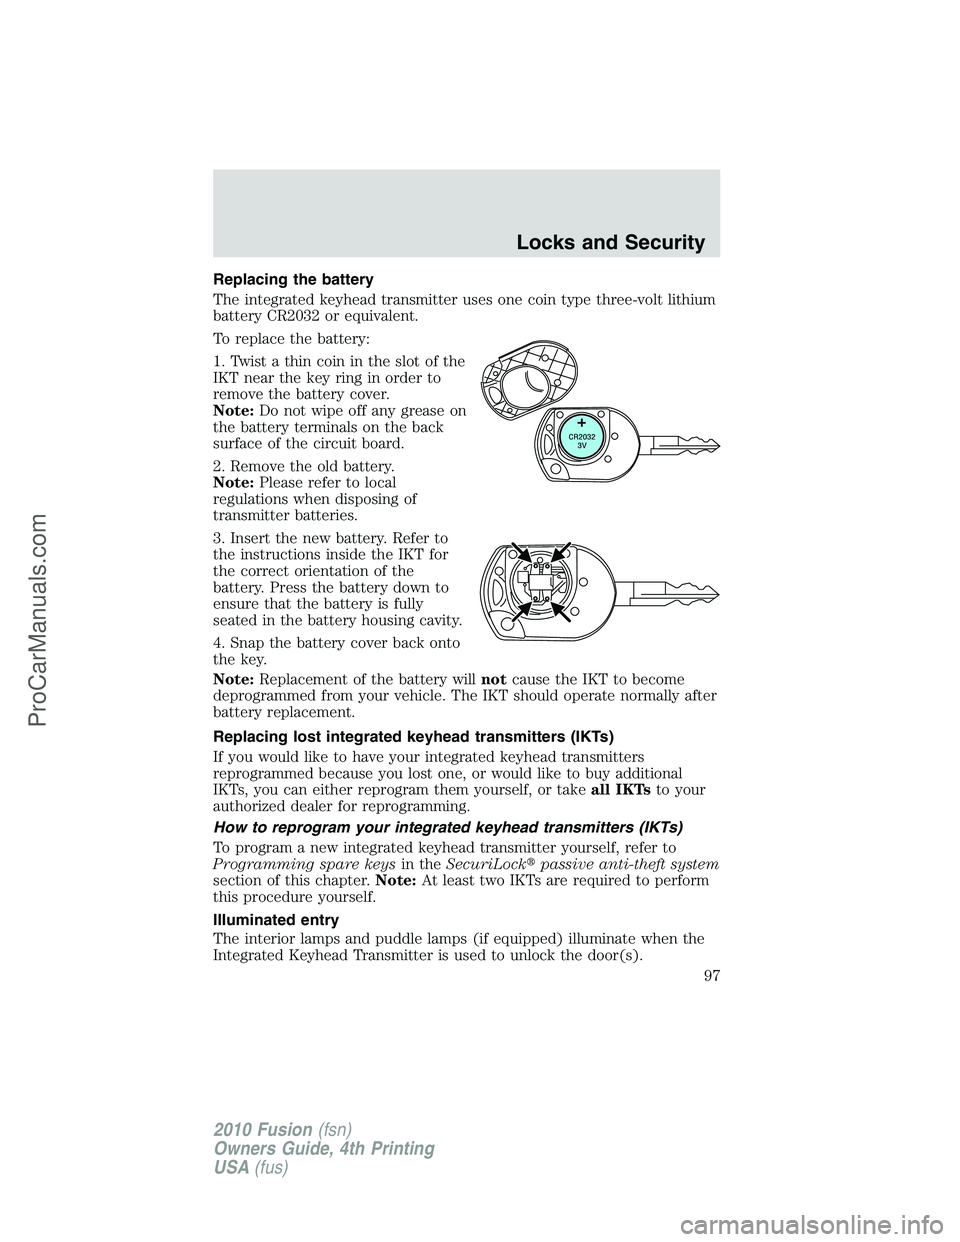 FORD FUSION 2010  Owners Manual Replacing the battery
The integrated keyhead transmitter uses one coin type three-volt lithium
battery CR2032 or equivalent.
To replace the battery:
1. Twist a thin coin in the slot of the
IKT near th